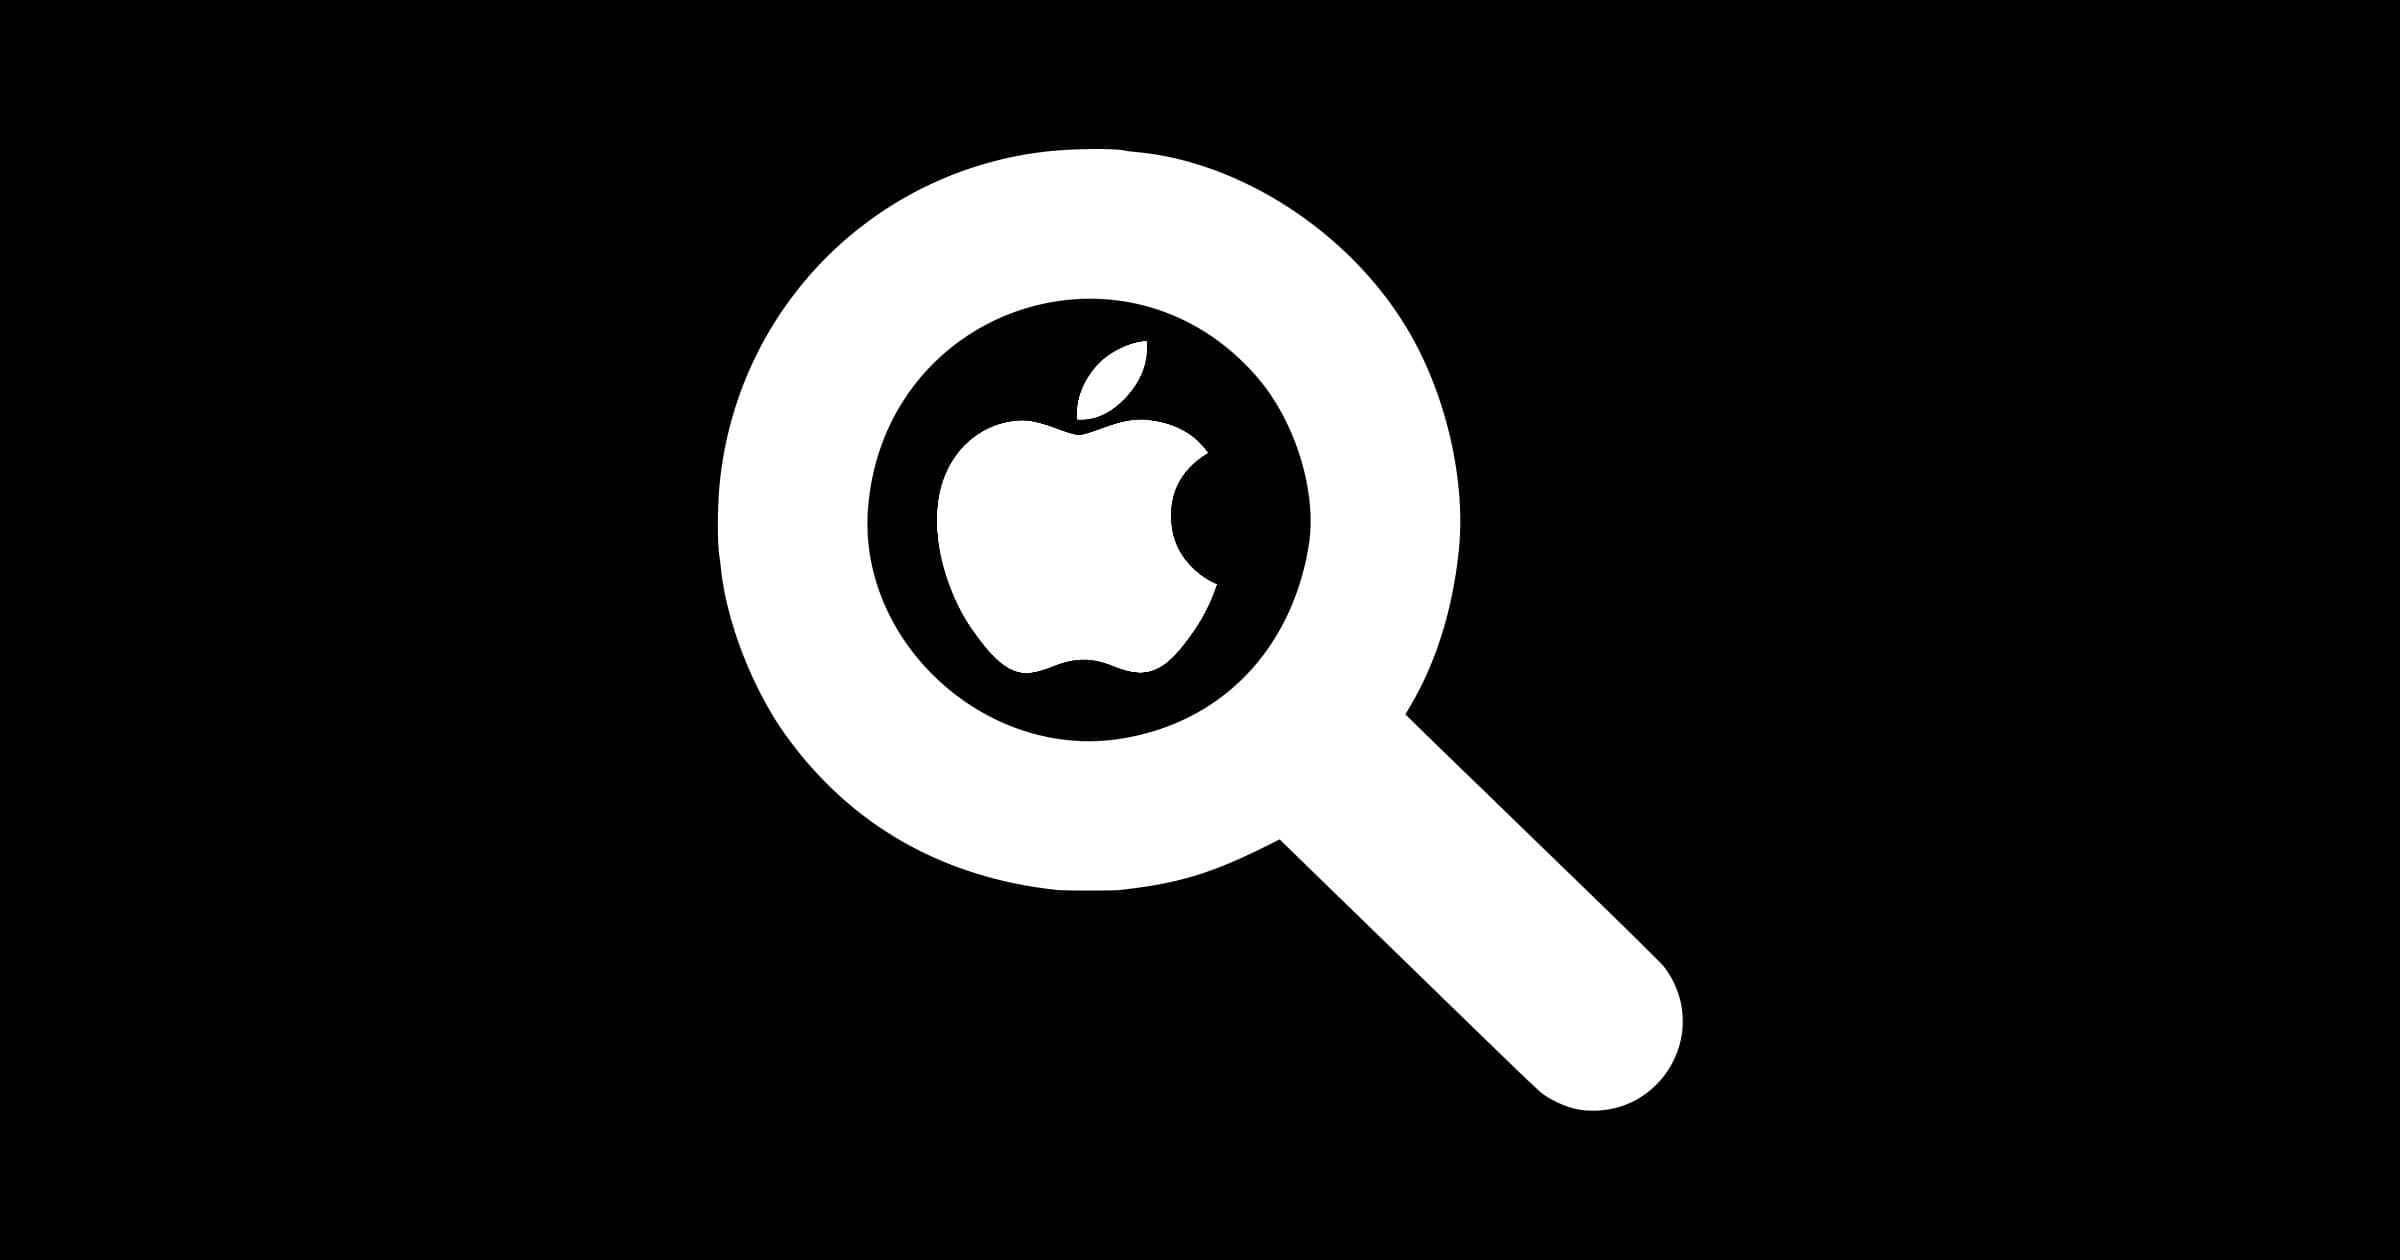 Will we see an Apple Search Engine in the Future?